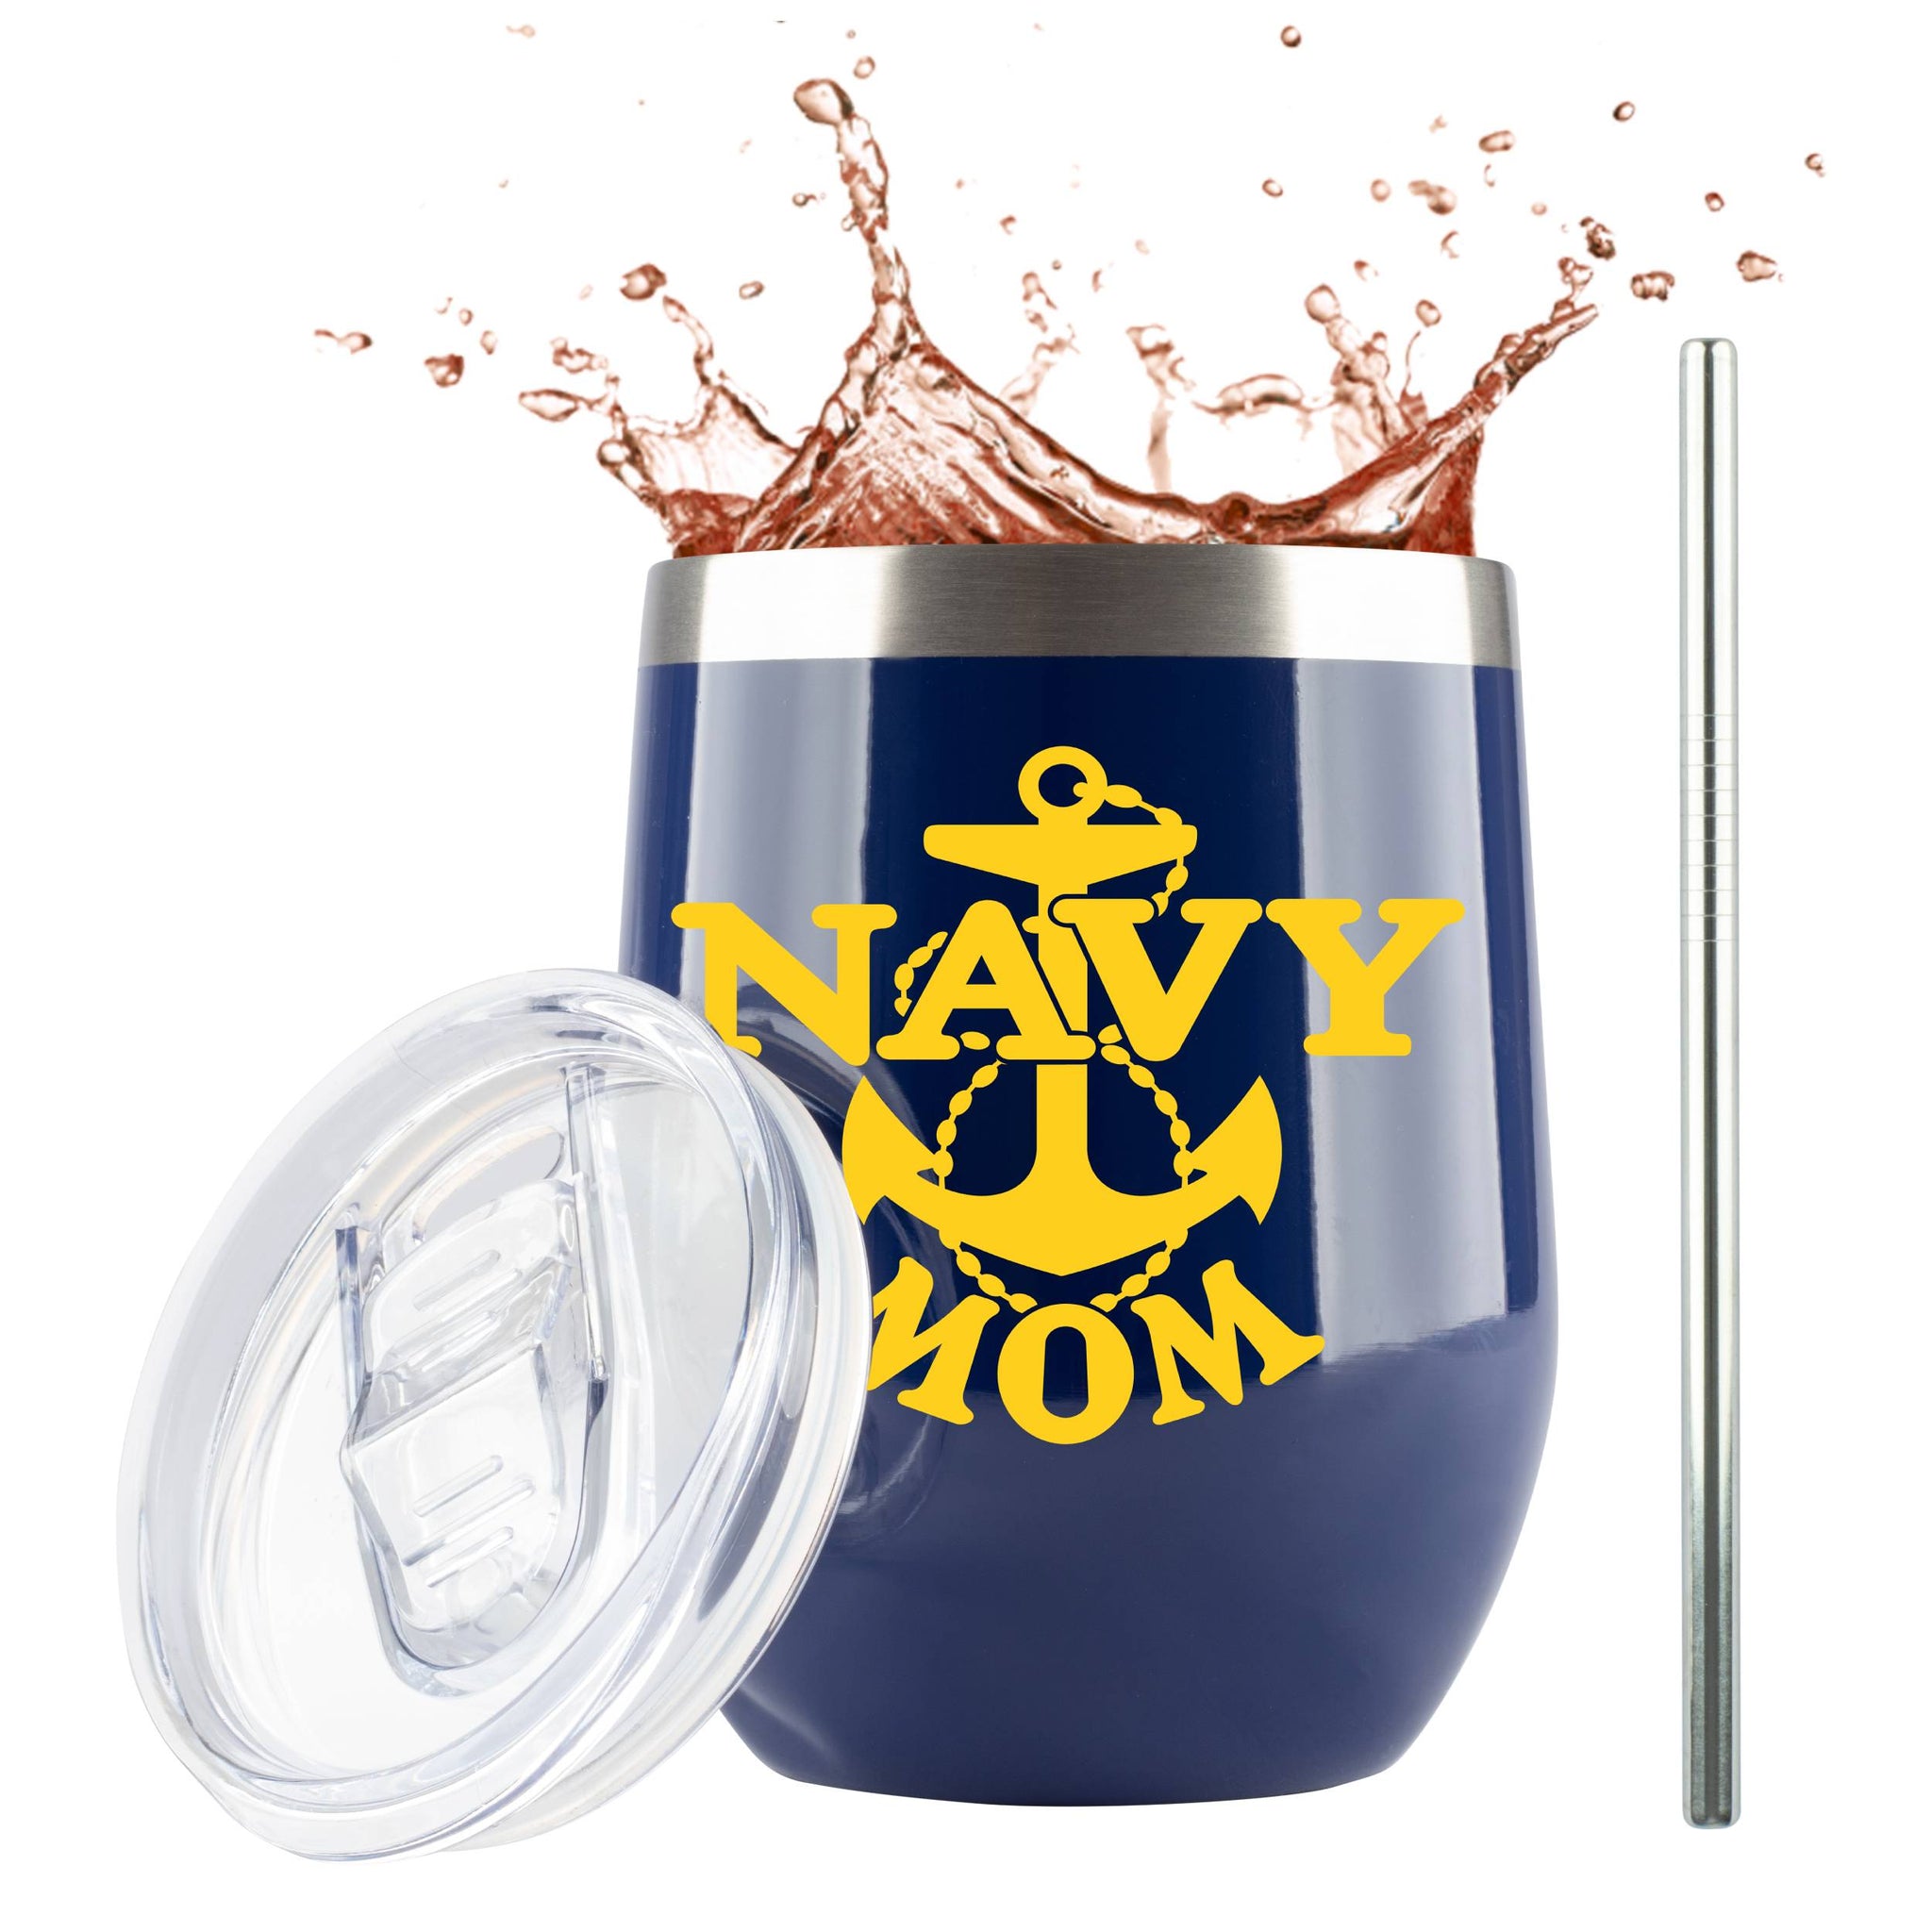 Best Mom Ever Navy Camp-style Stainless Steel Travel Tumbler